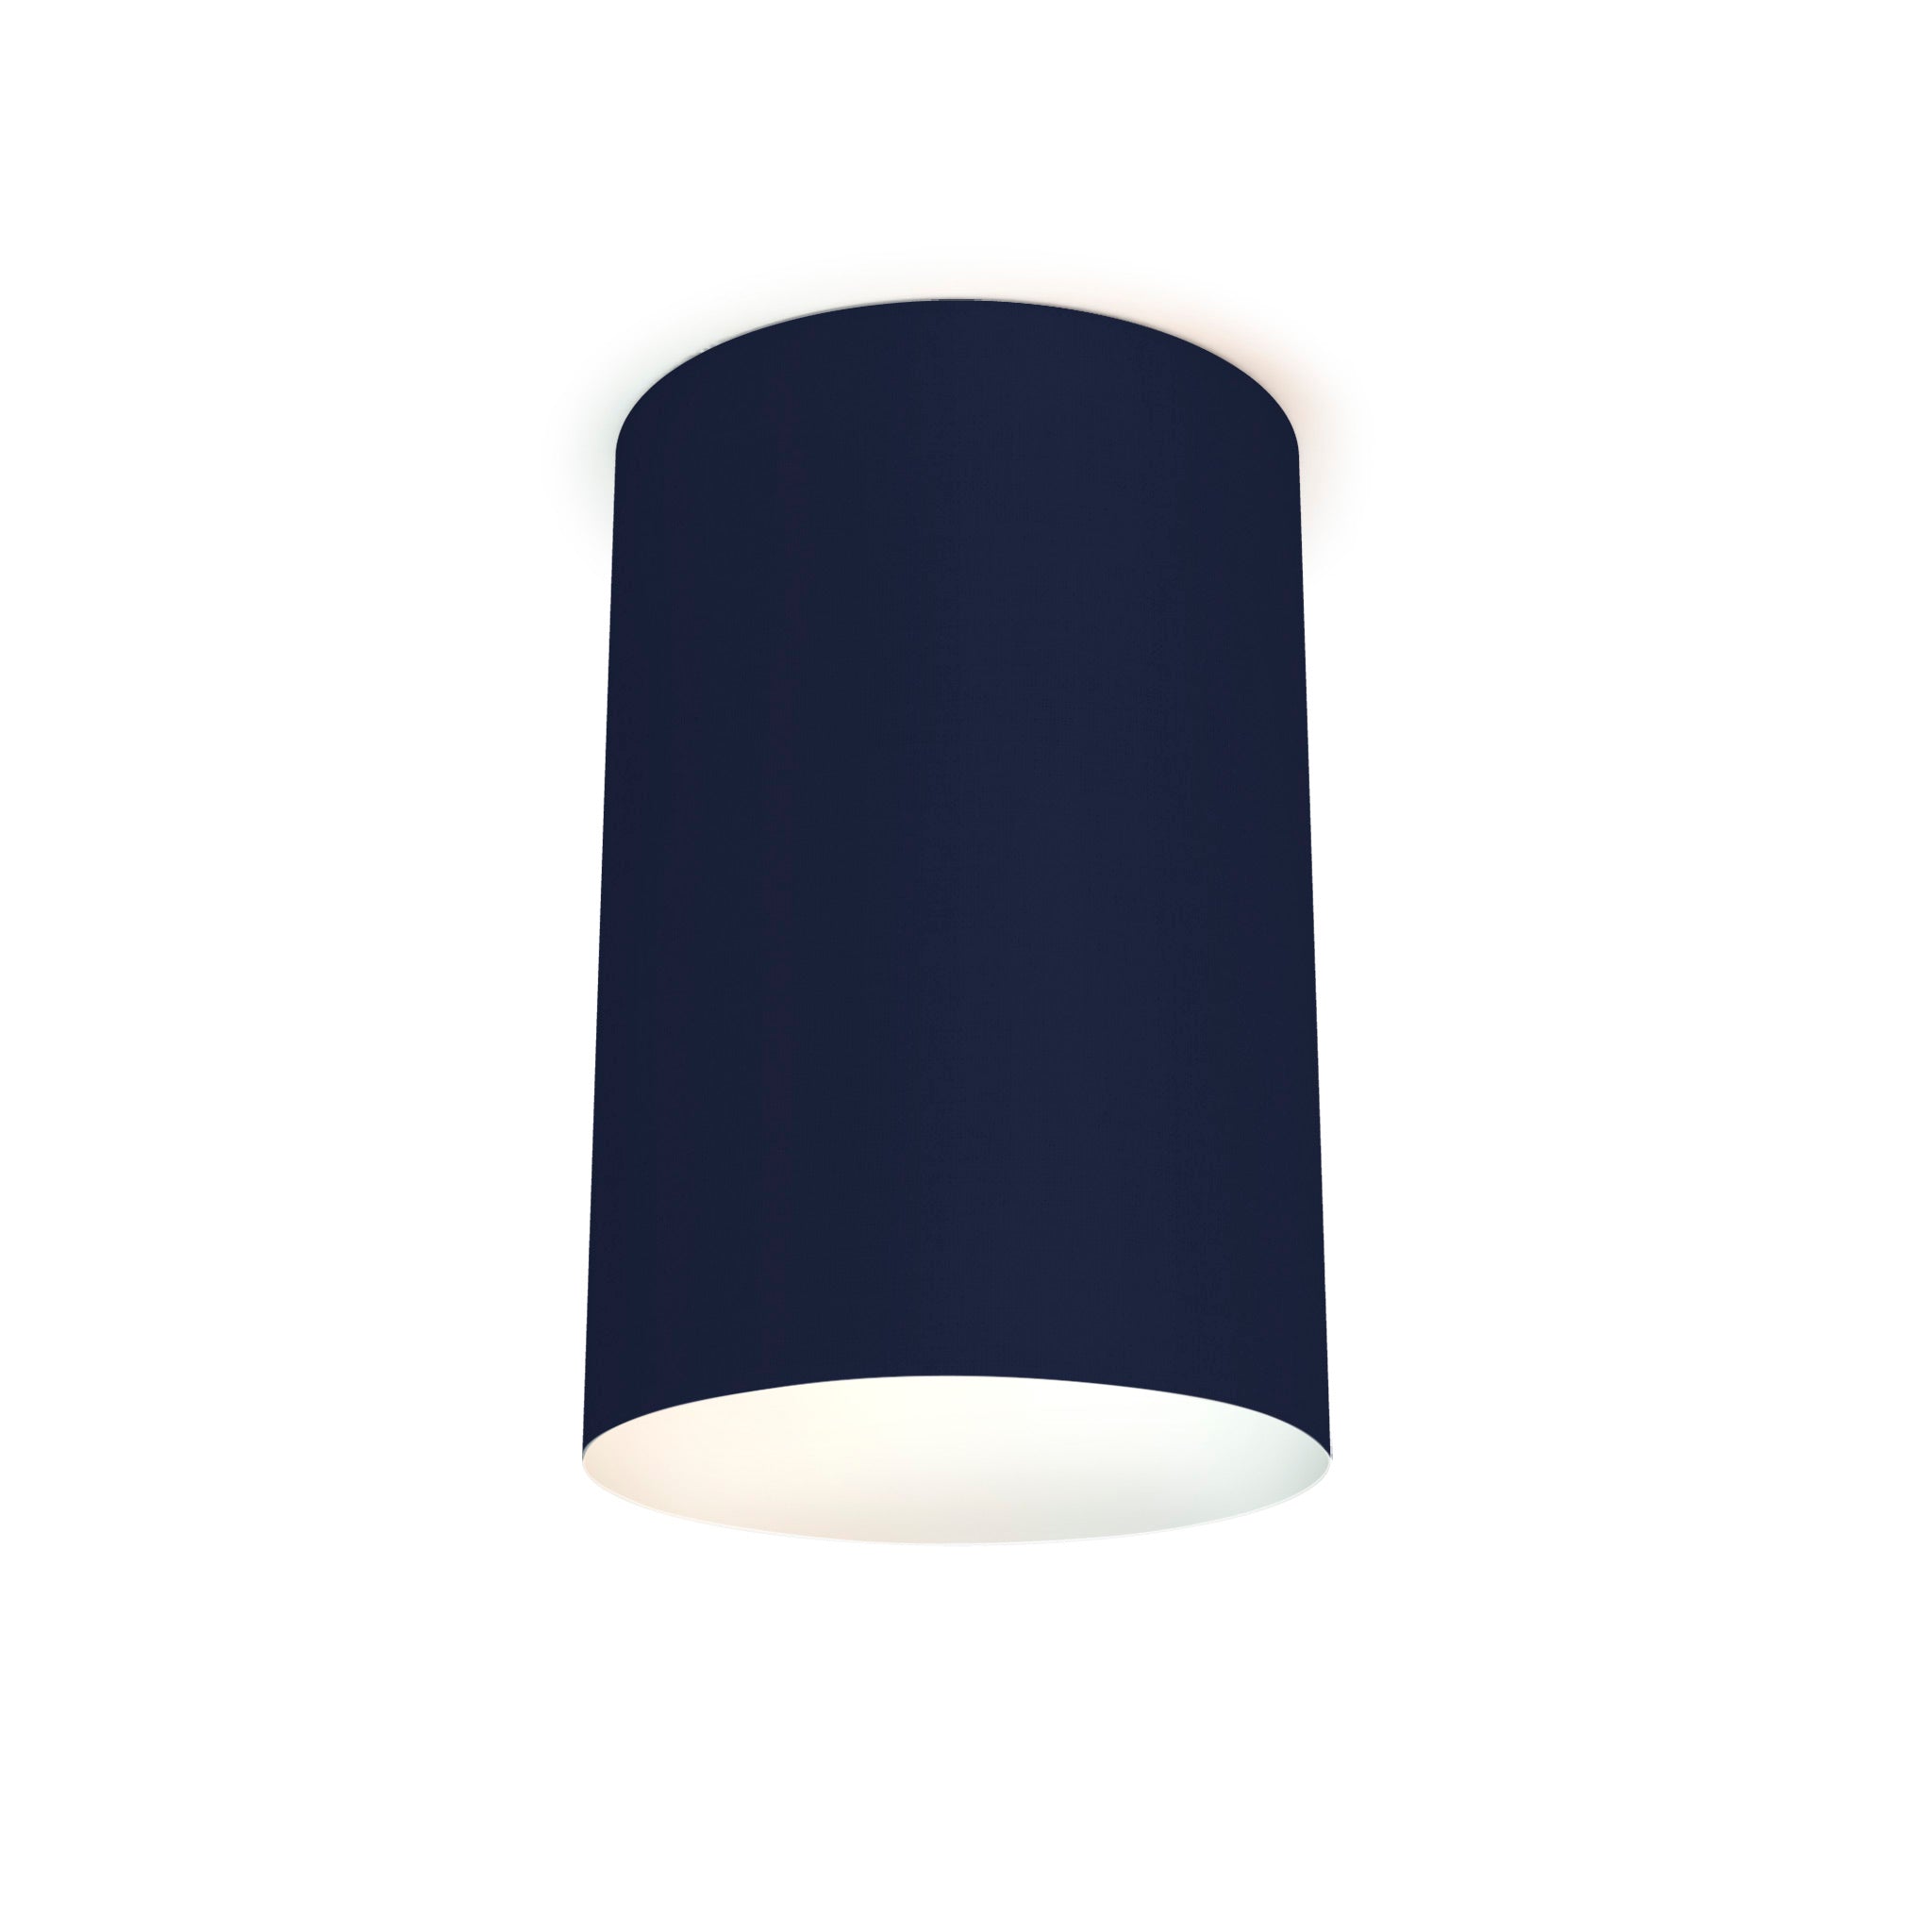 The Lily Flush Mount from Seascape Fixtures in linen, navy color.